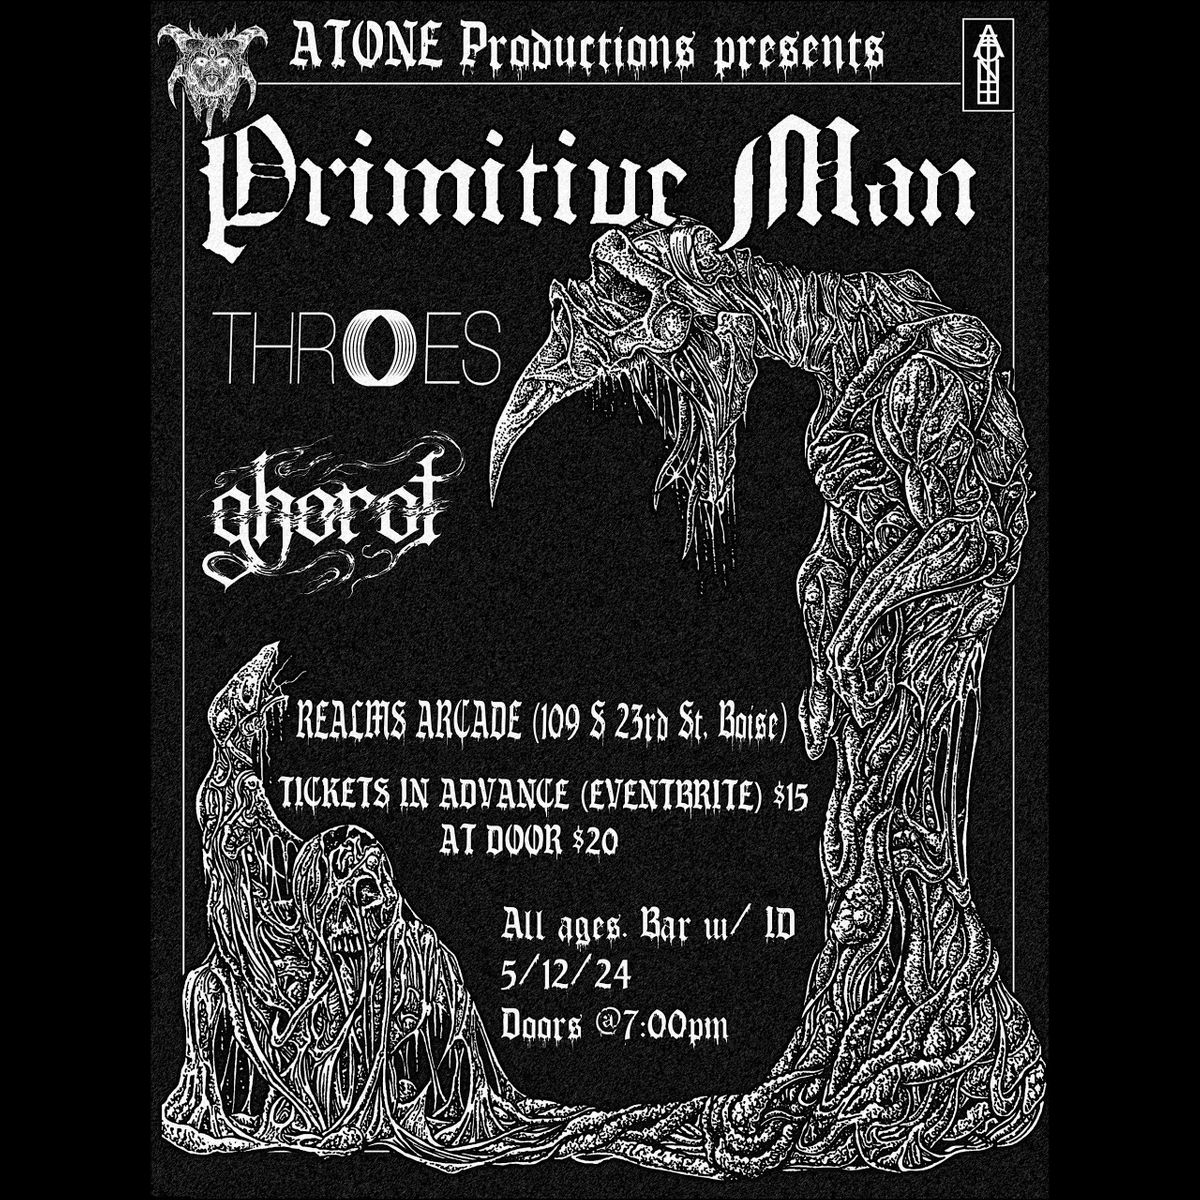 Primitive Man, Throes, Ghorot